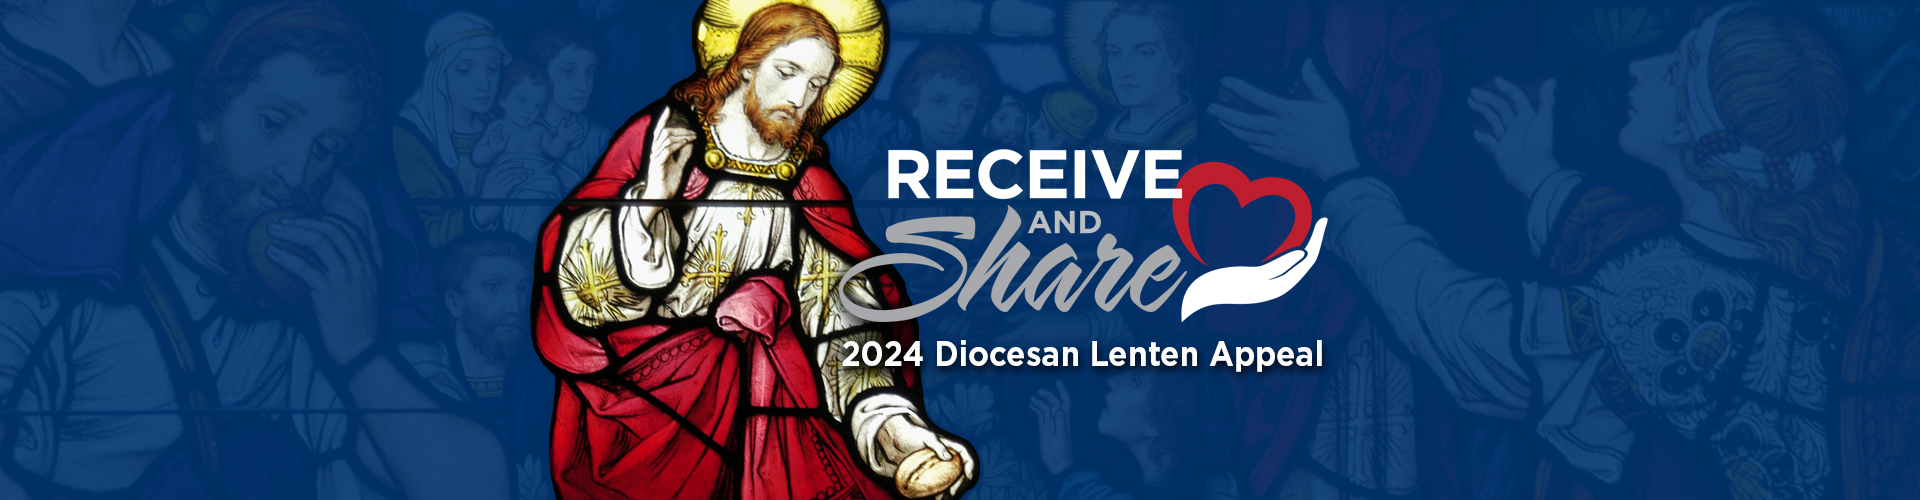 Receive and Share - 2024 Diocesan Lenten Appeal